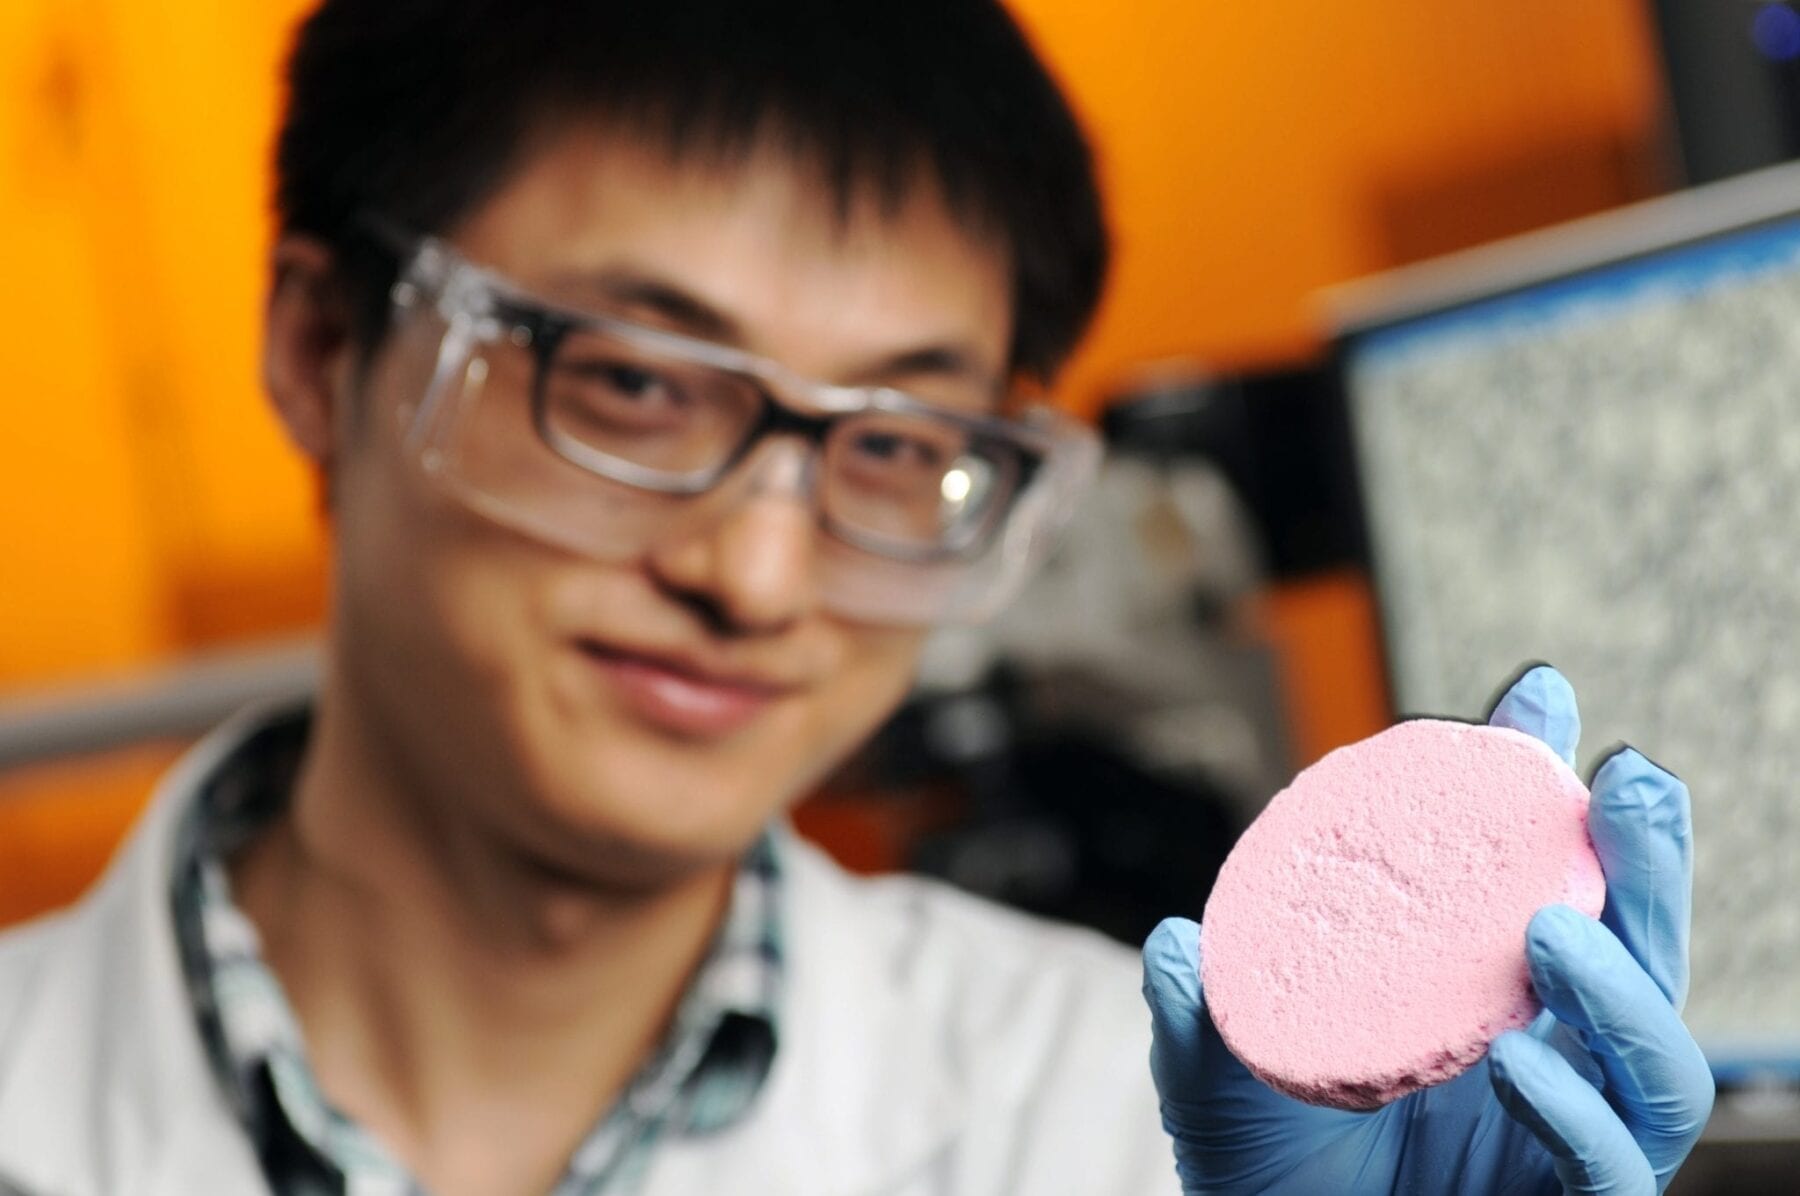 Discovery of a New Way to Make Foams Could Lead to Lightweight, Sustainable Materials